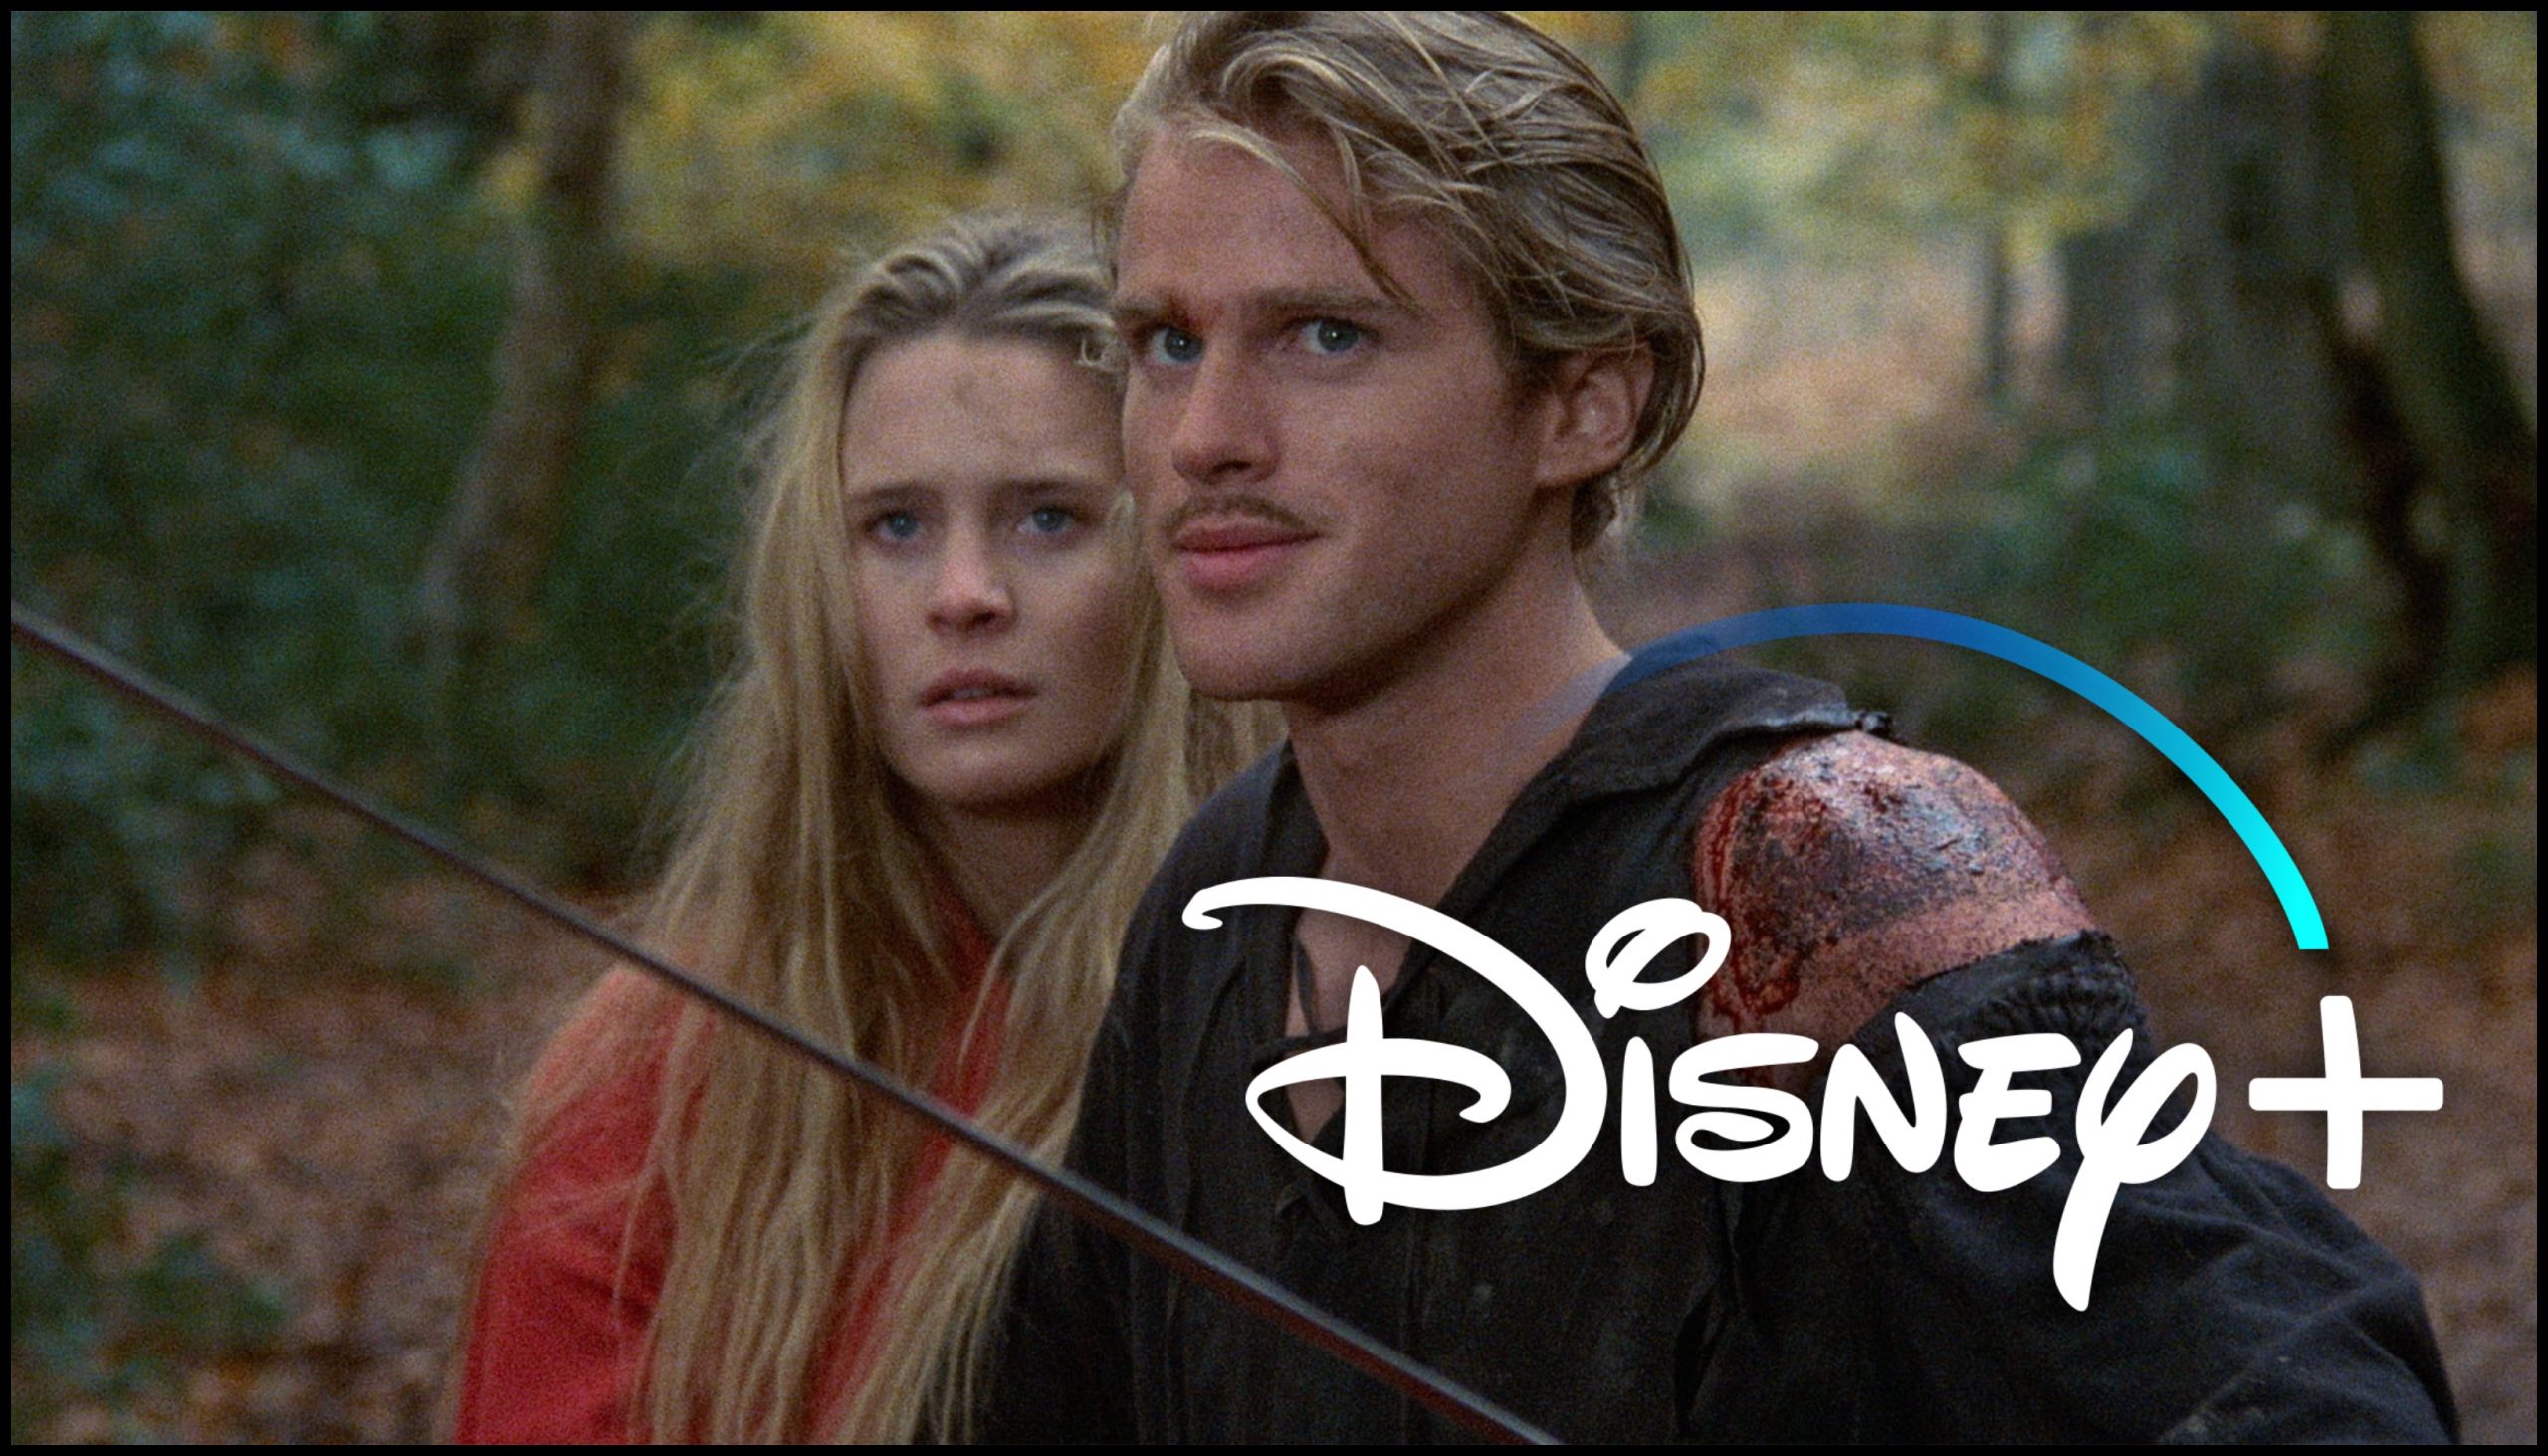 ‘The Princess Bride’ is Coming to Disney+